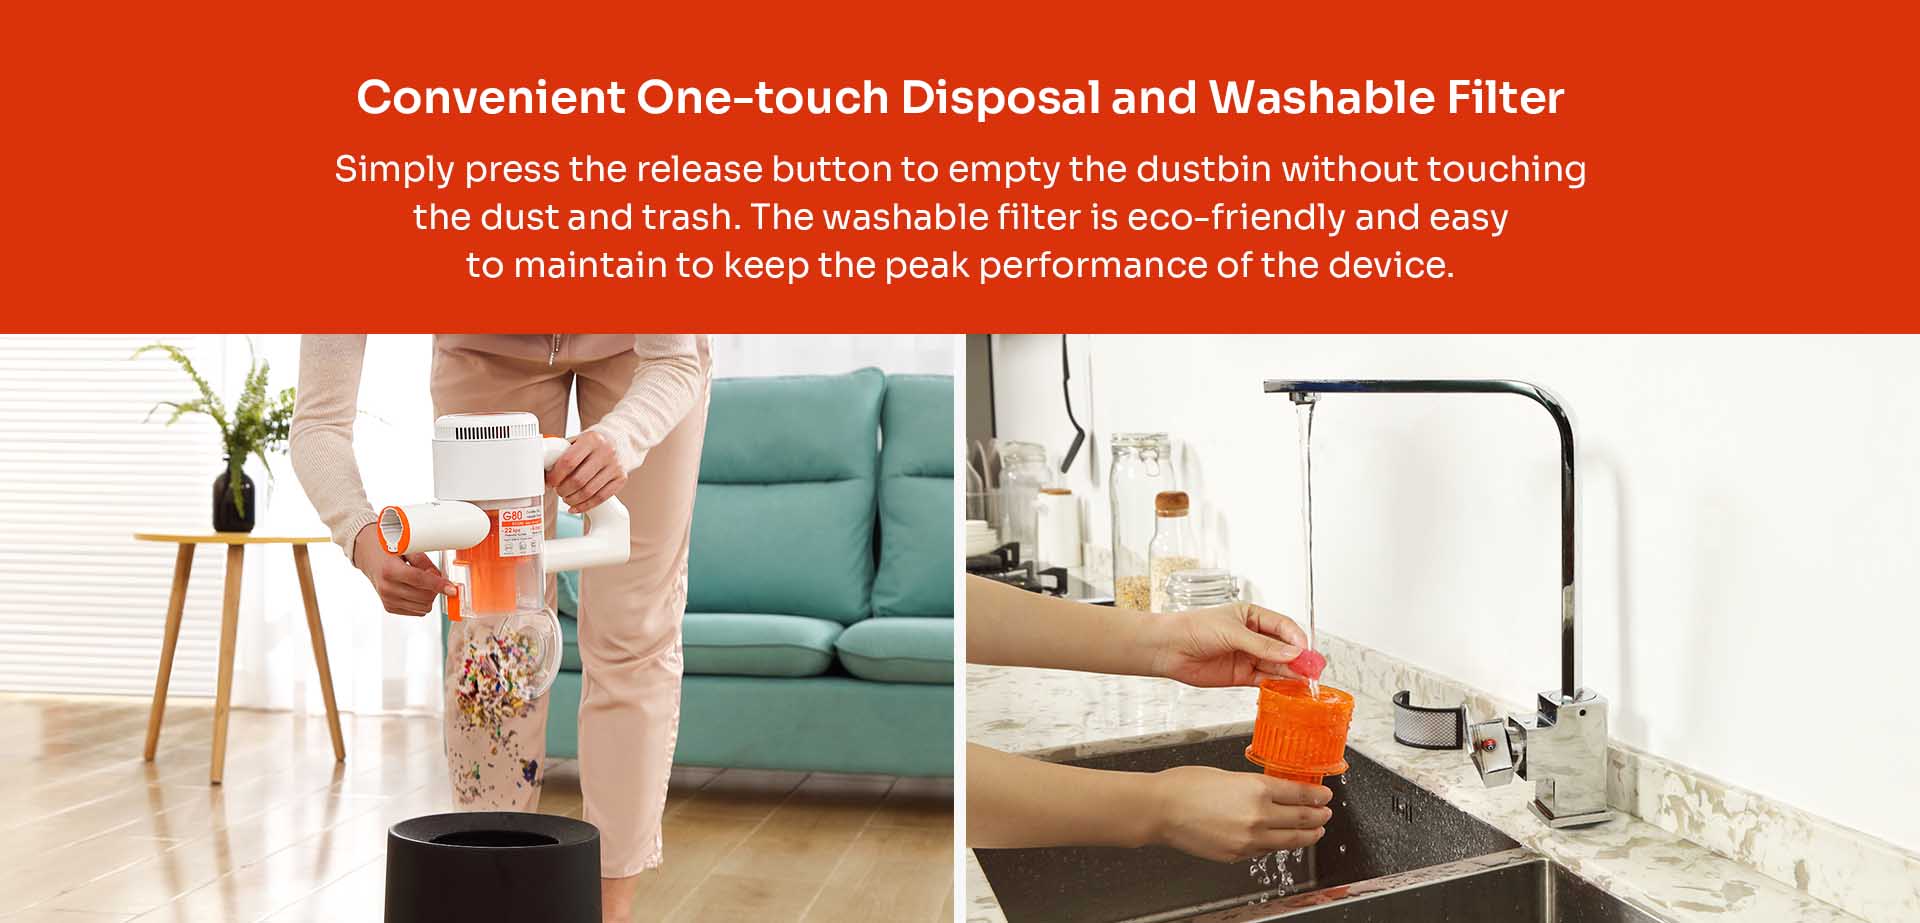 Convient one touch disposal